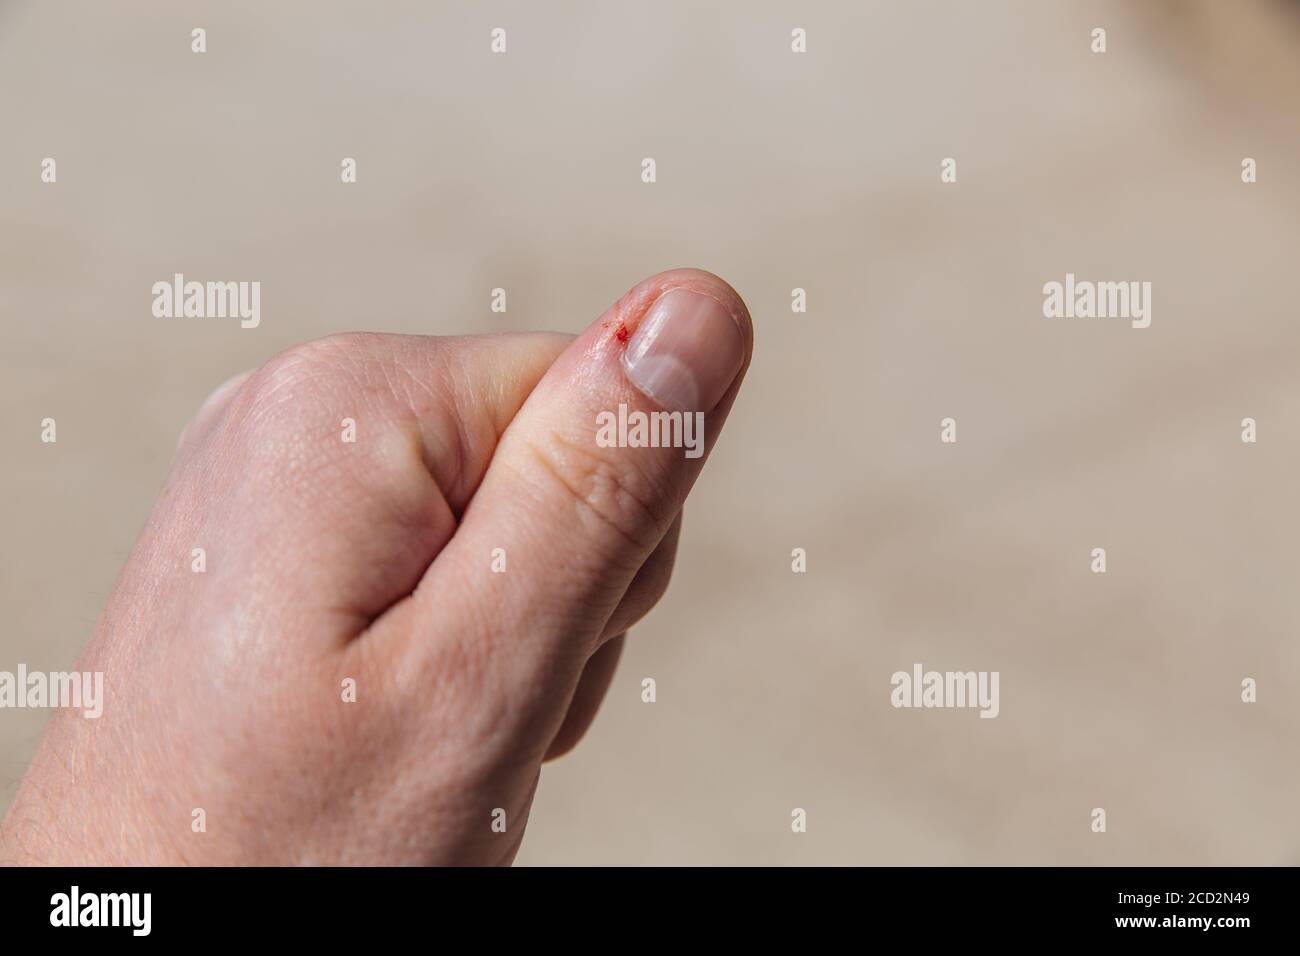 Thumb trauma. Bleeding from a cut finger. Blood from a finger. Stock Photo